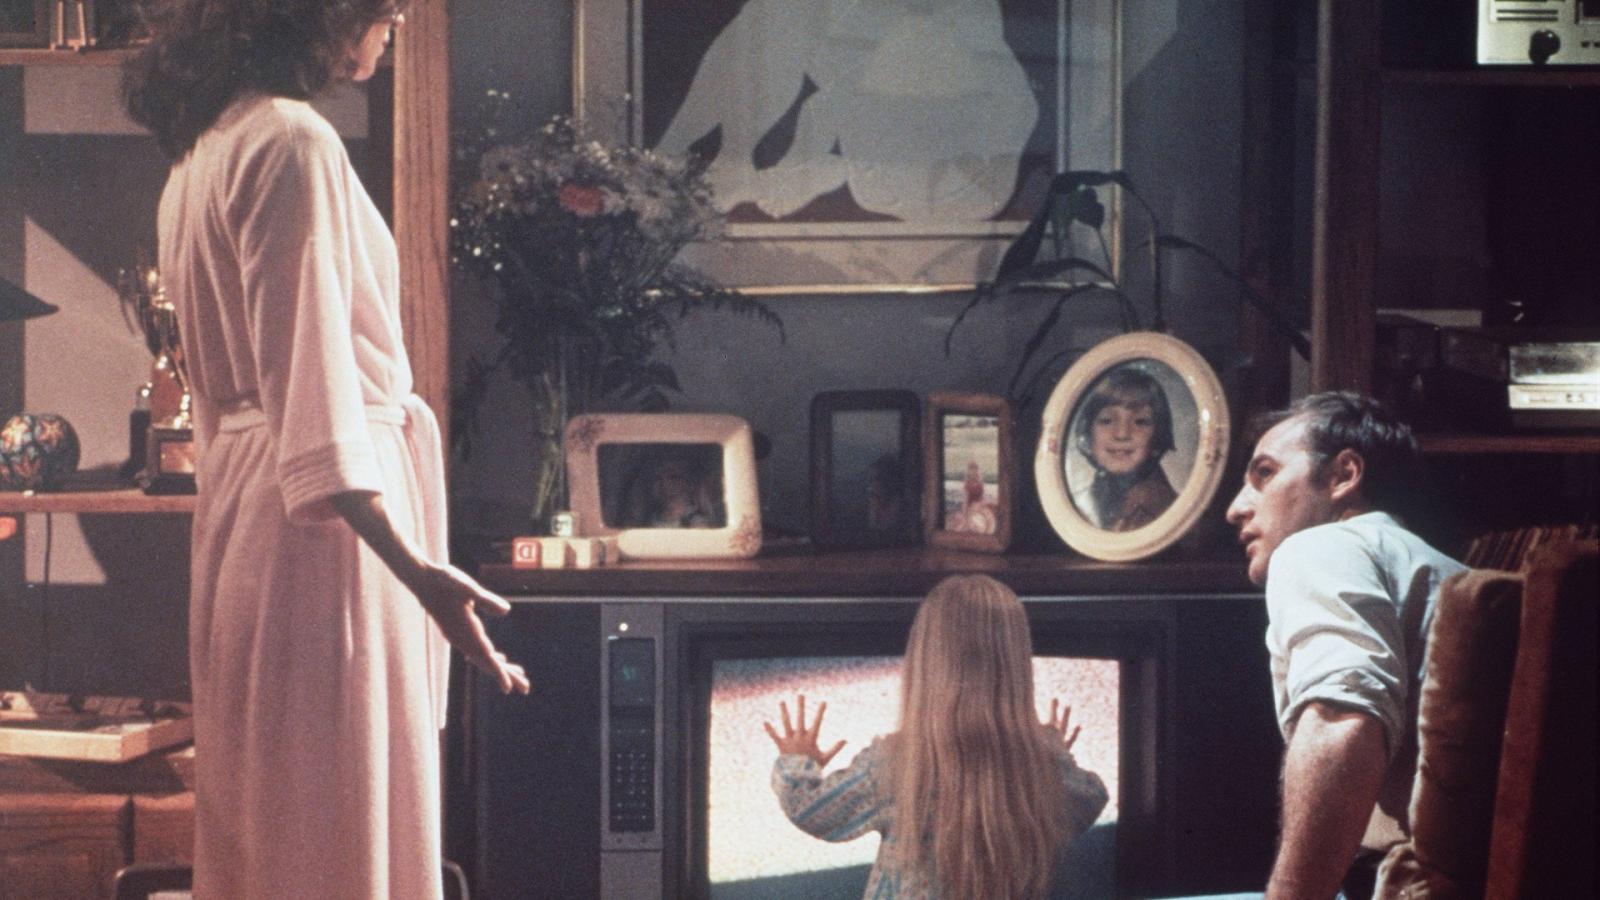 15 Scary Movies to Watch With Kids This Halloween Instead of Trick-or-Treating - image 6